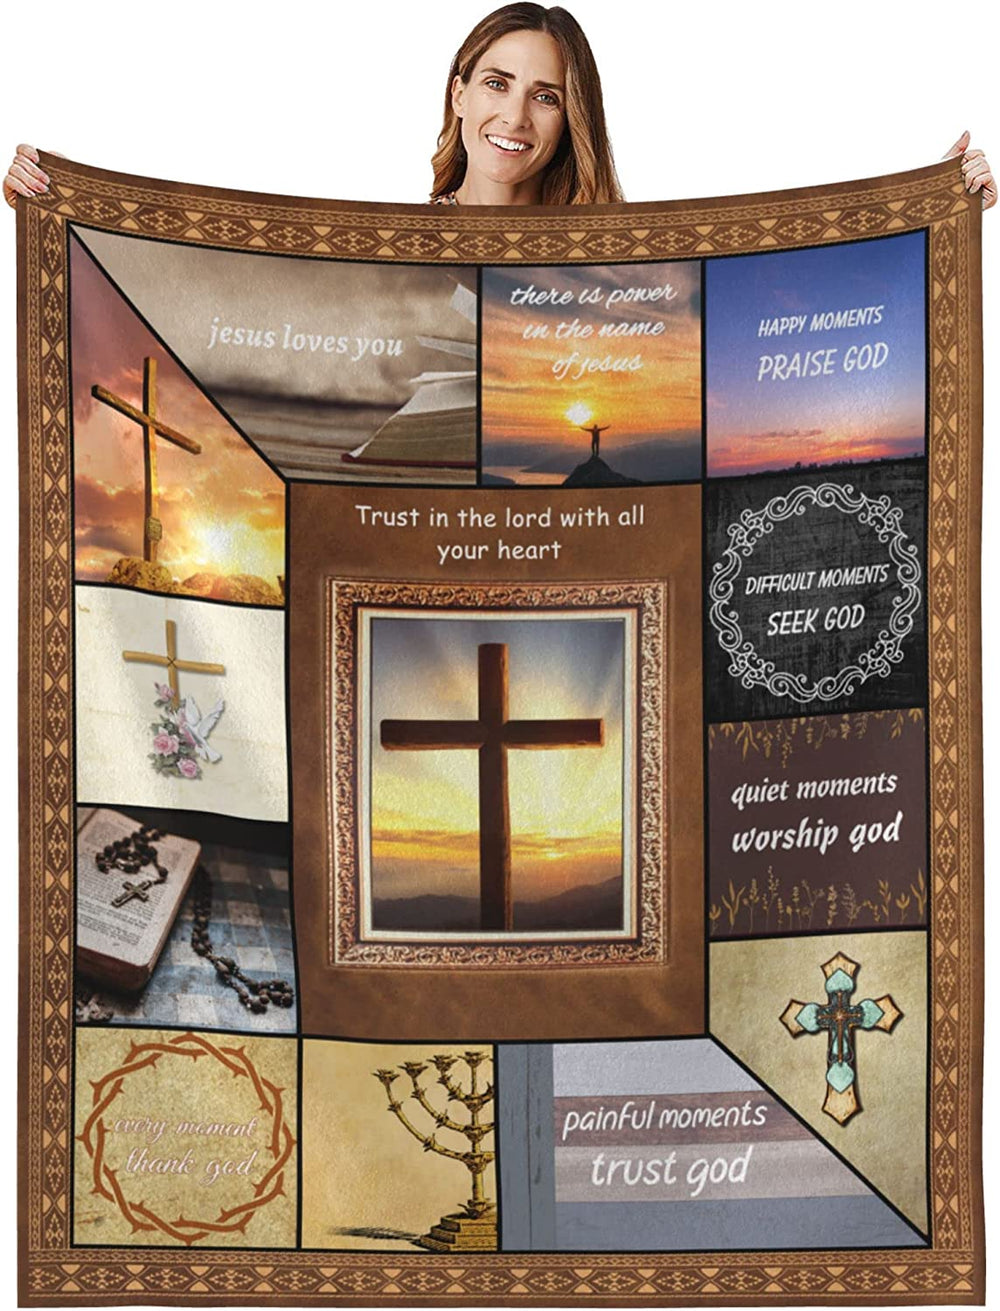 Religious and Spiritual Gifts for Women: Scripture Throw Blanket with Bible Verses – JEB031